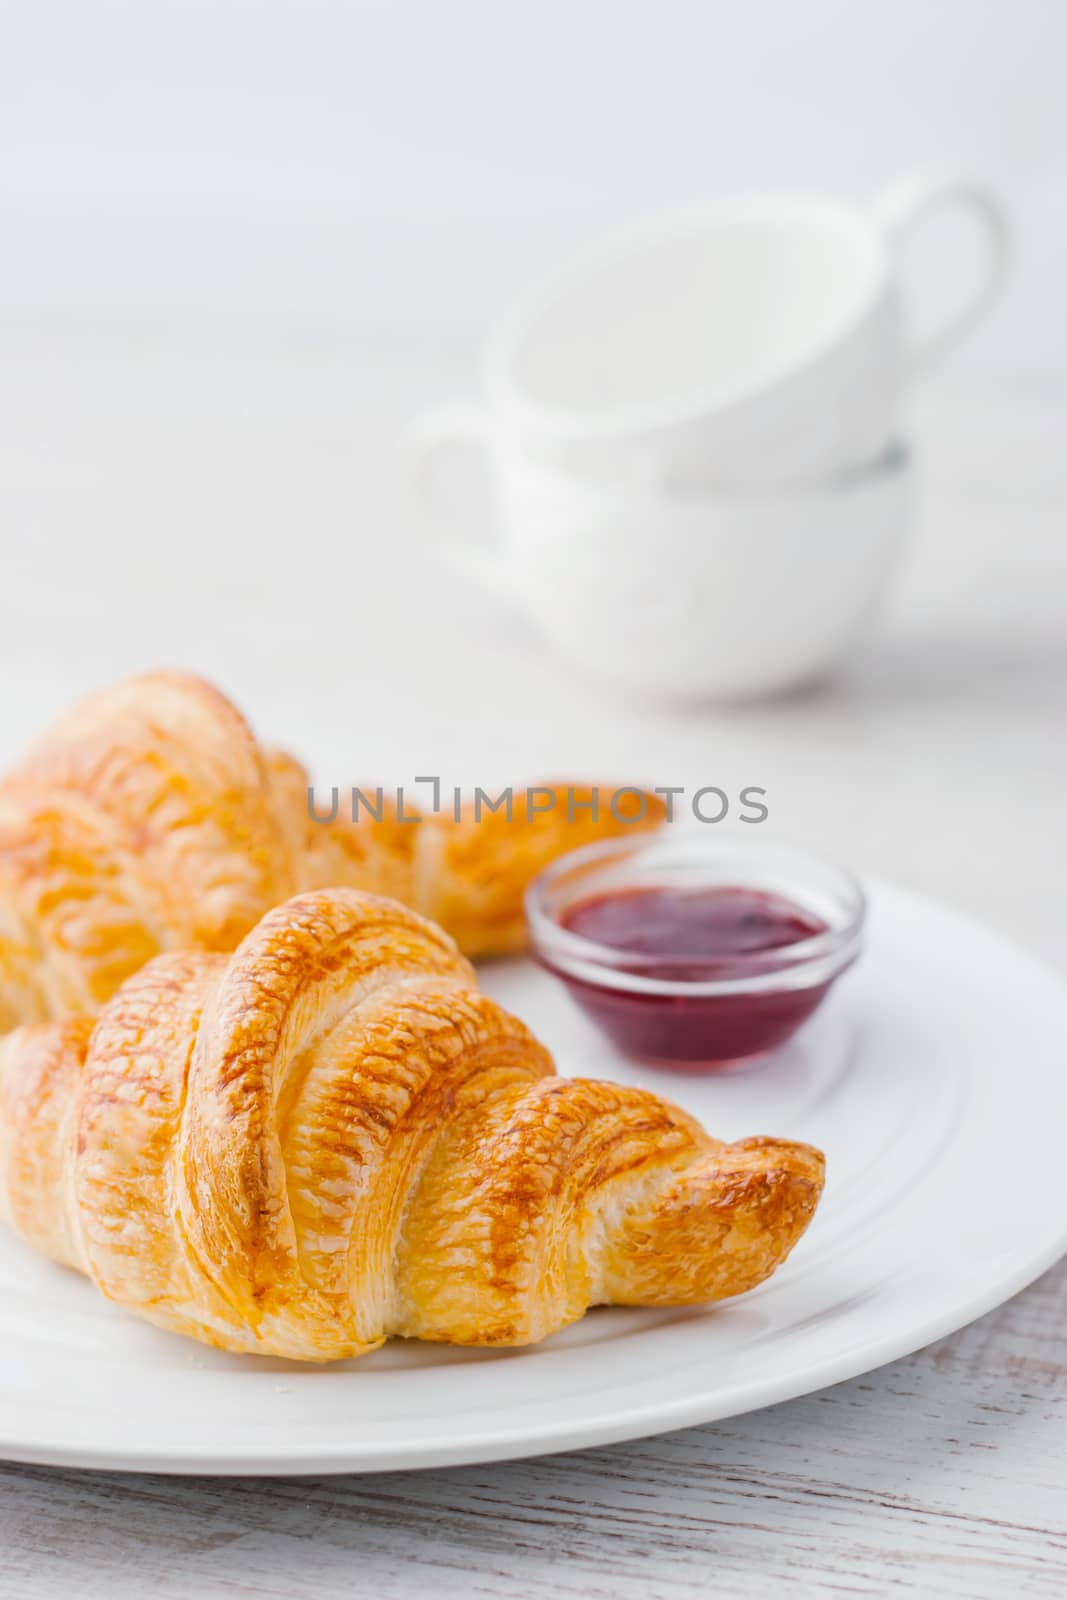 Croissants with jam and two white ceramic cups vertical